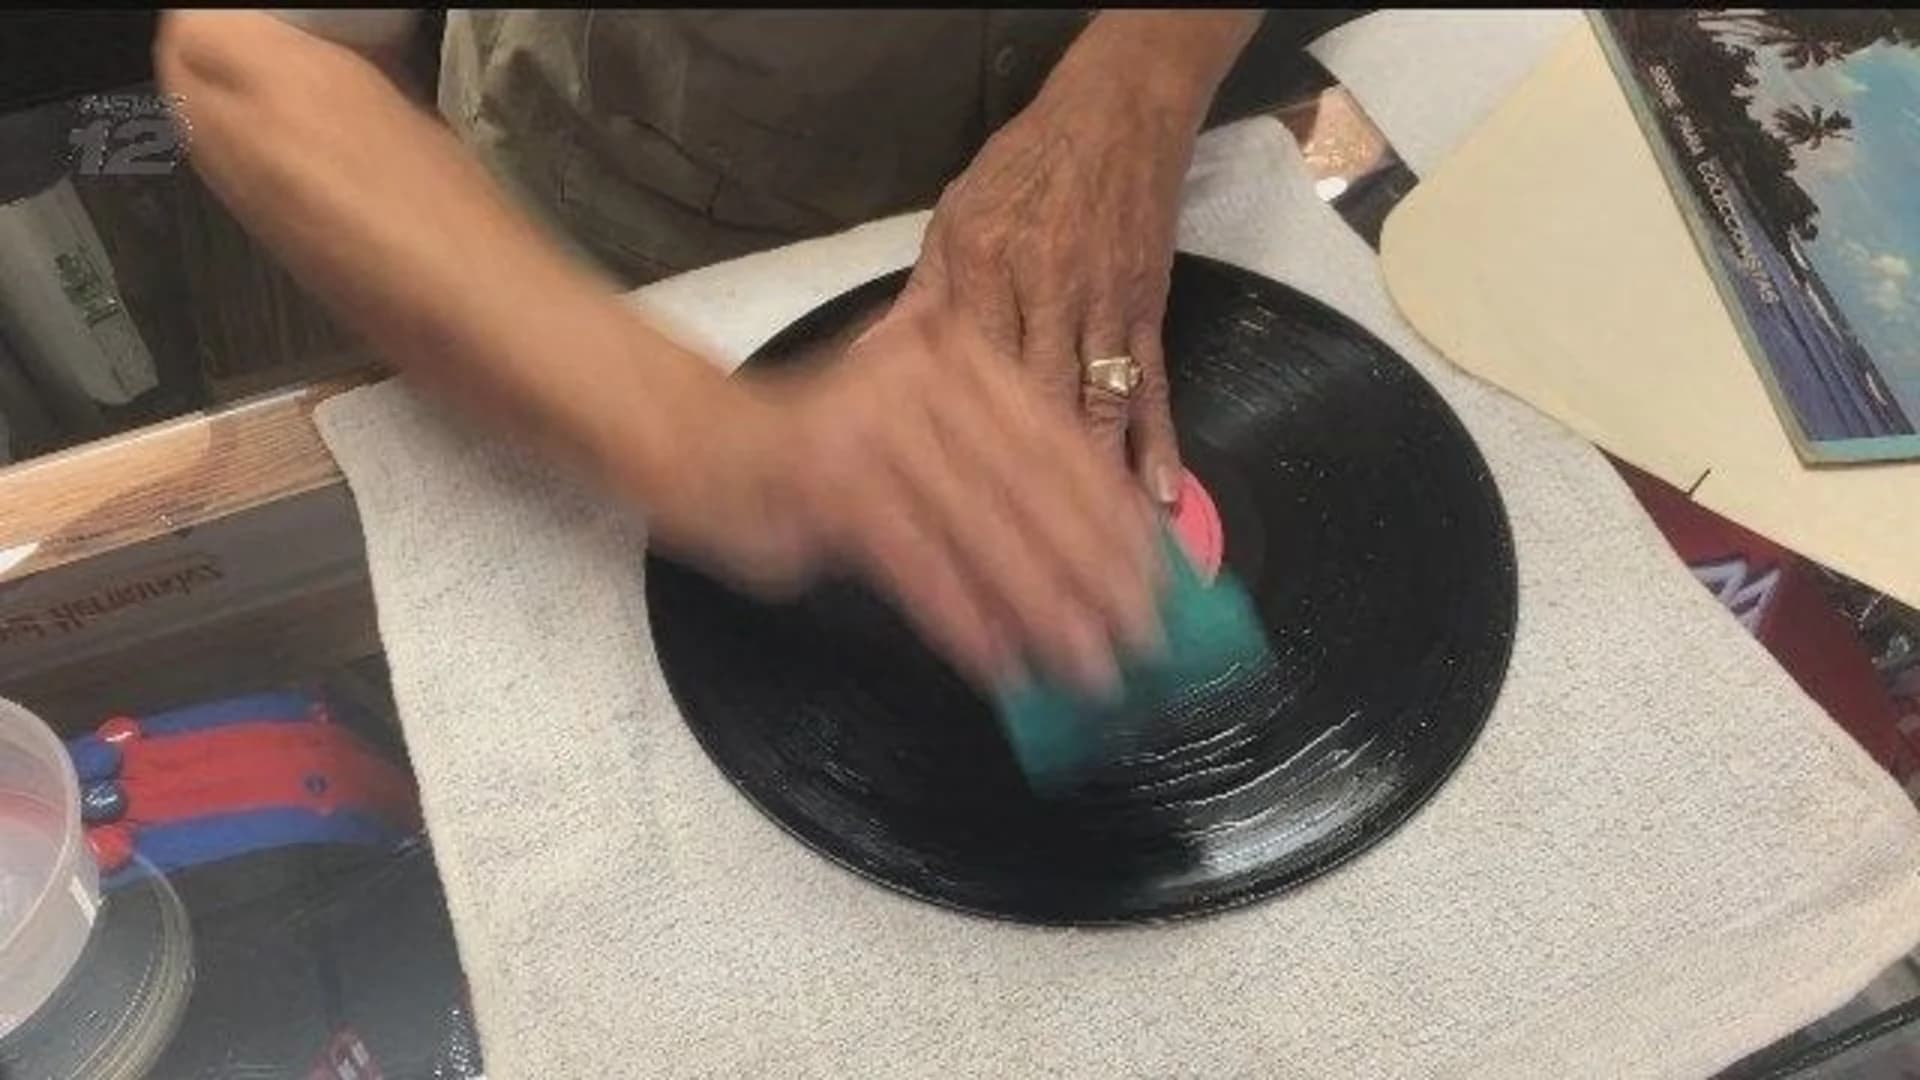 South Bronx record shop owner offers tips on cleaning records